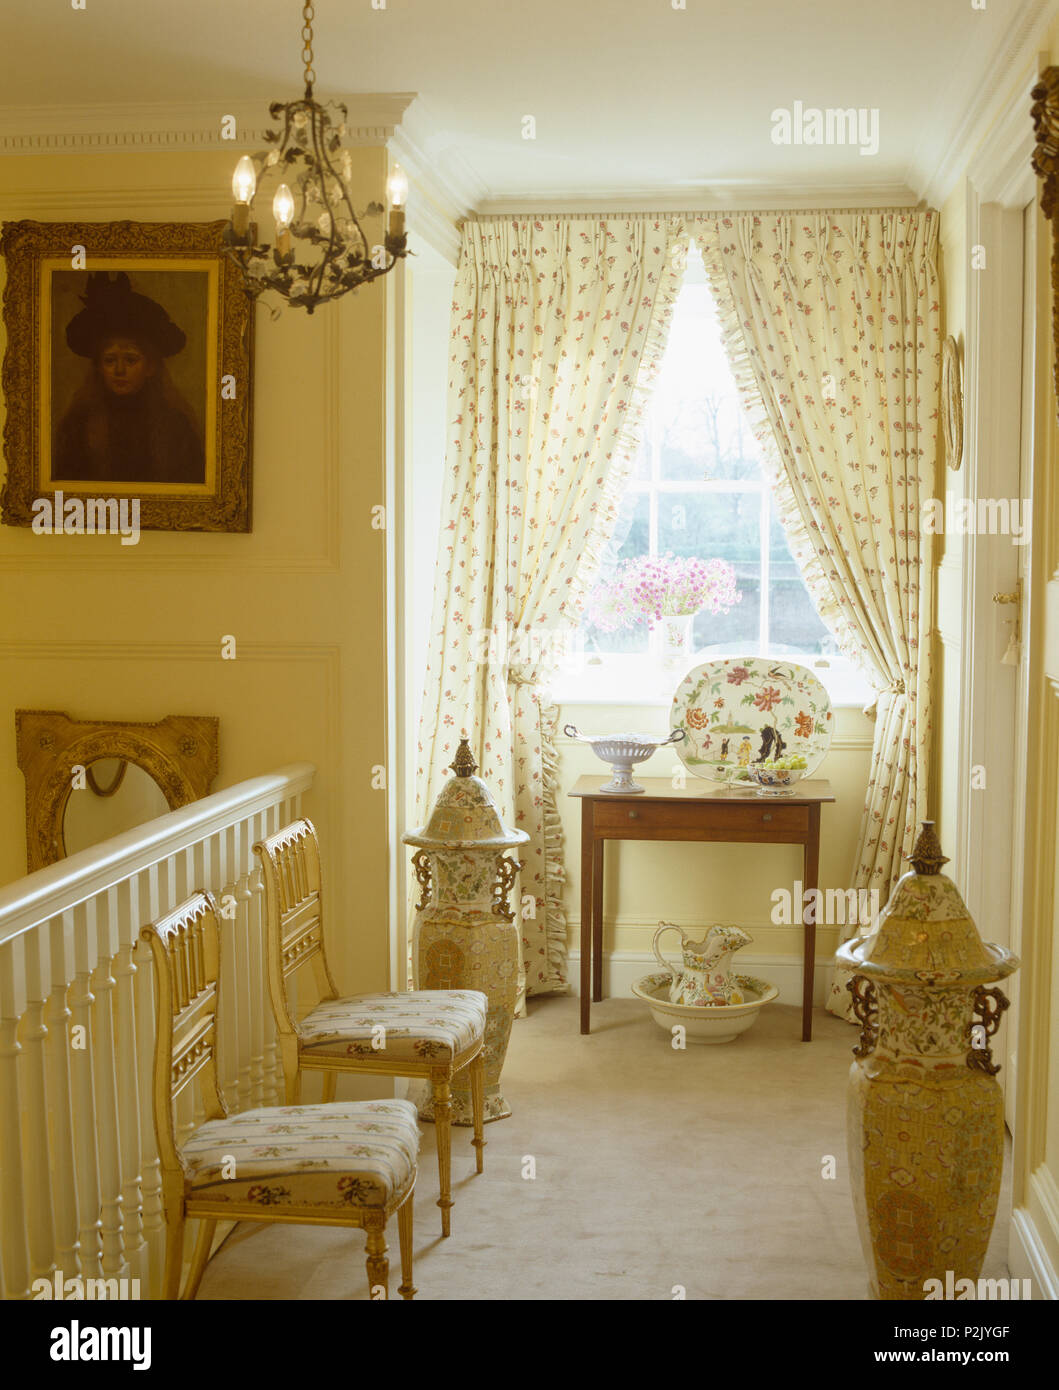 Long cream patterned curtains on window on landing with antique upholstered chairs and tall Chinese vases Stock Photo